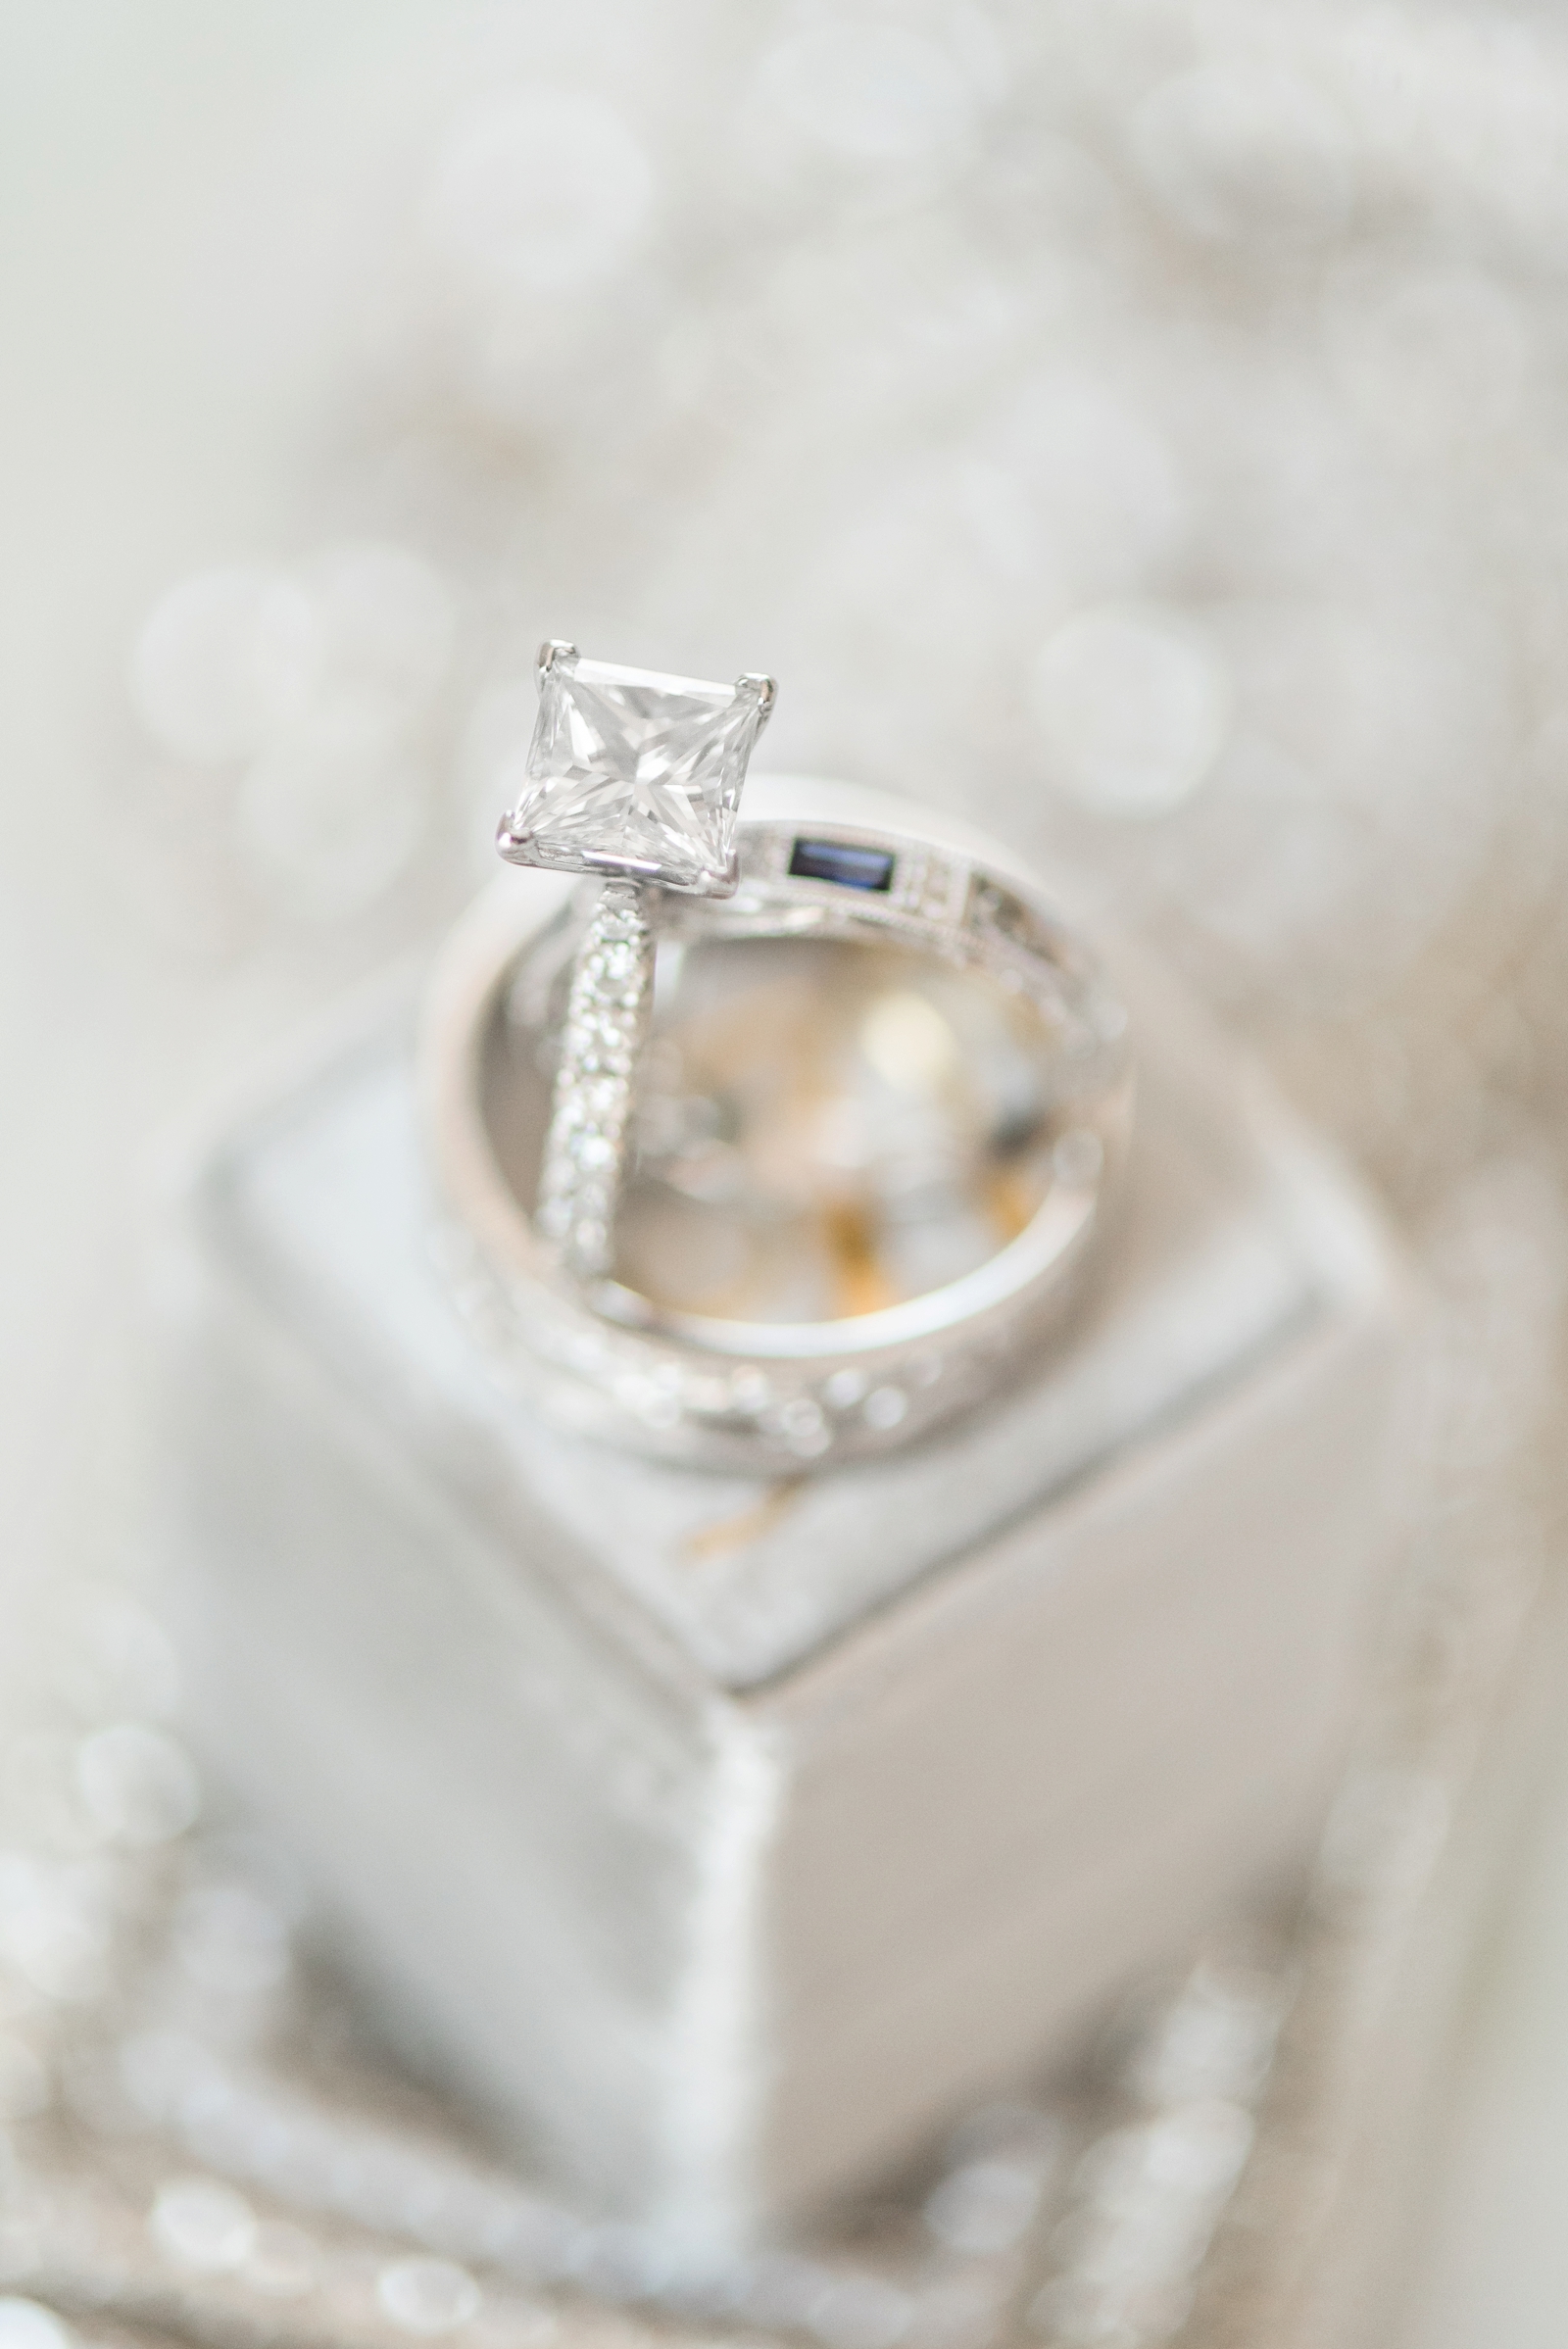 4 tips for photographing engagement and wedding rings